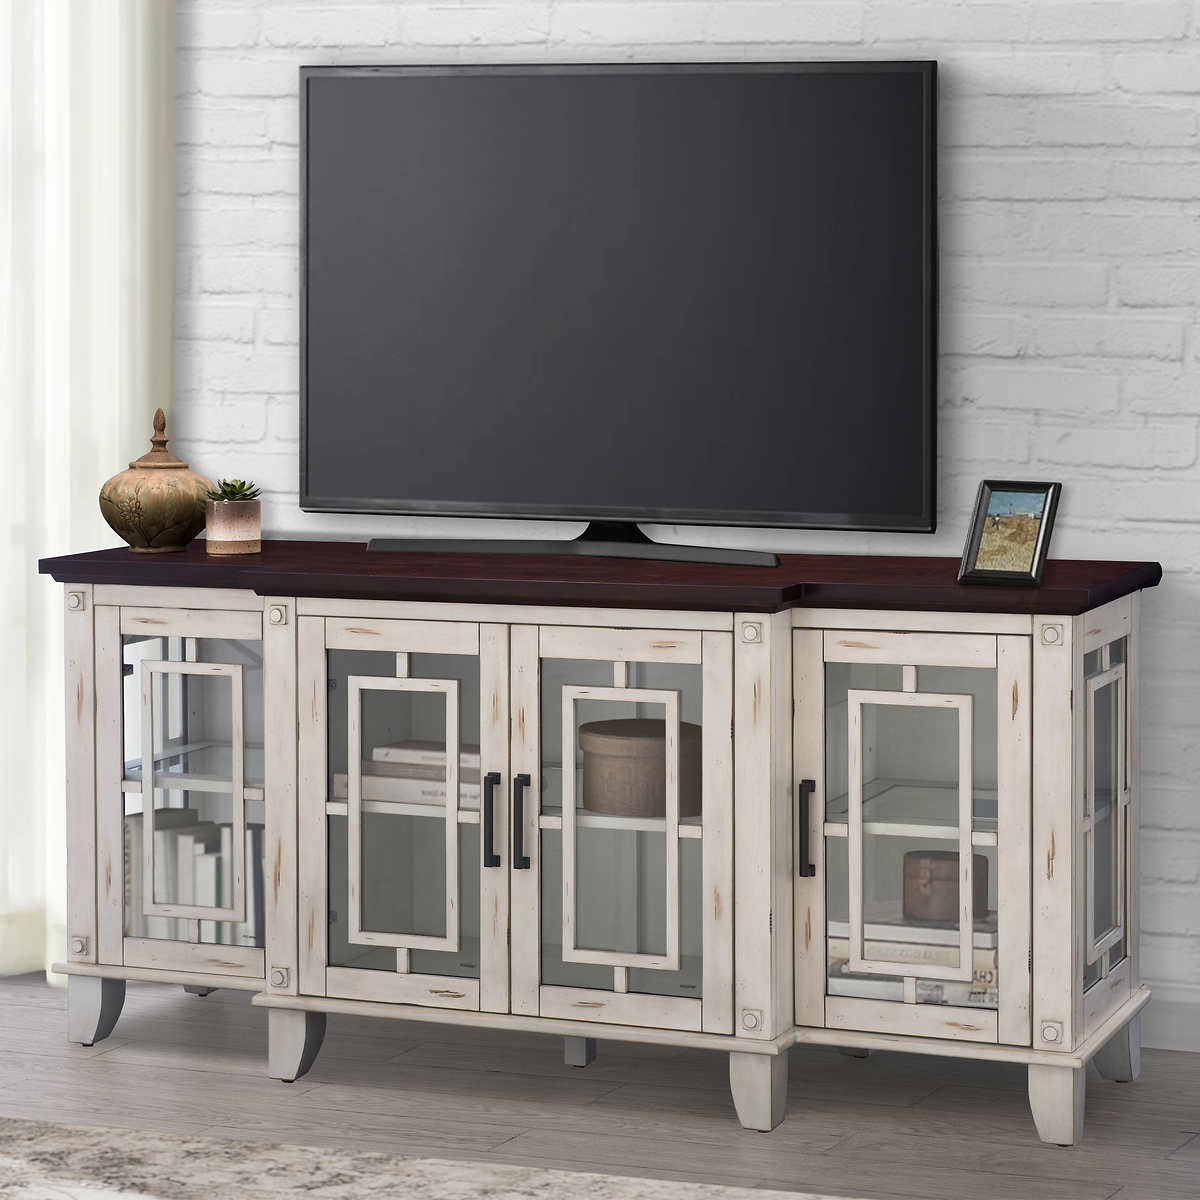 Costco Entertainment Center: Transform Your Living Room with Style